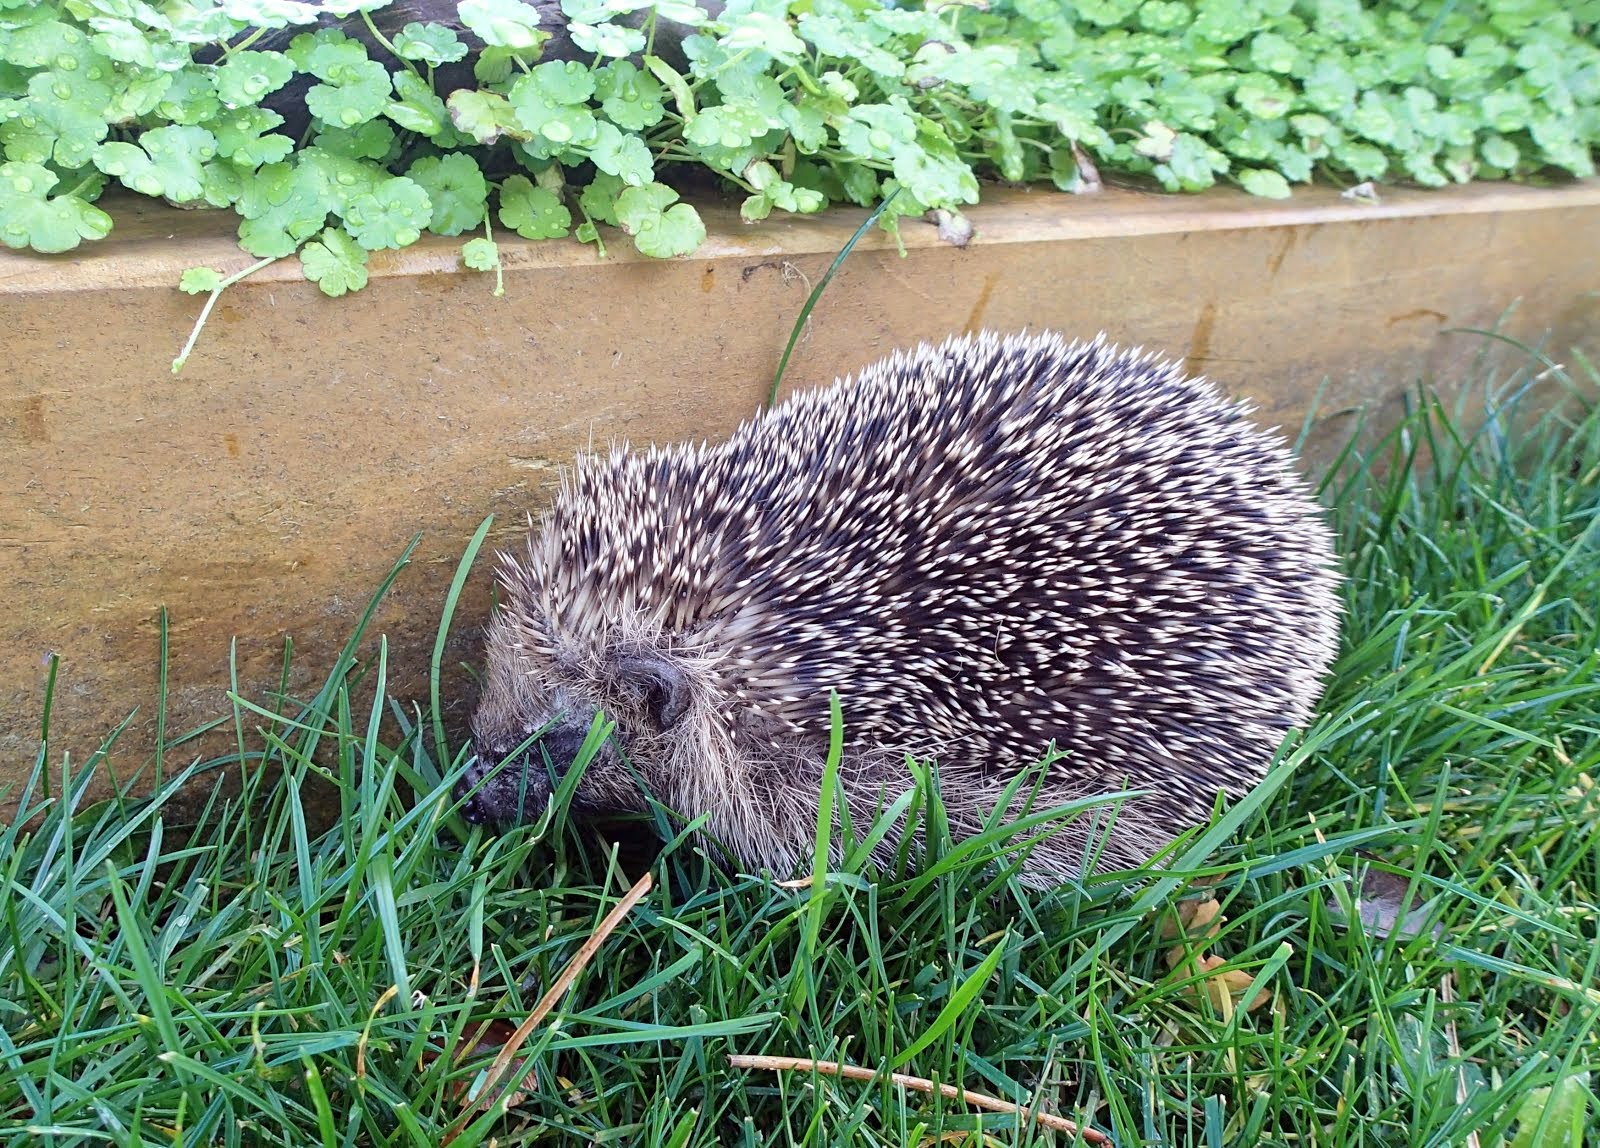 Baby hedgehog, powering around the yard today. It's moving into 'no hedgehog here' position.